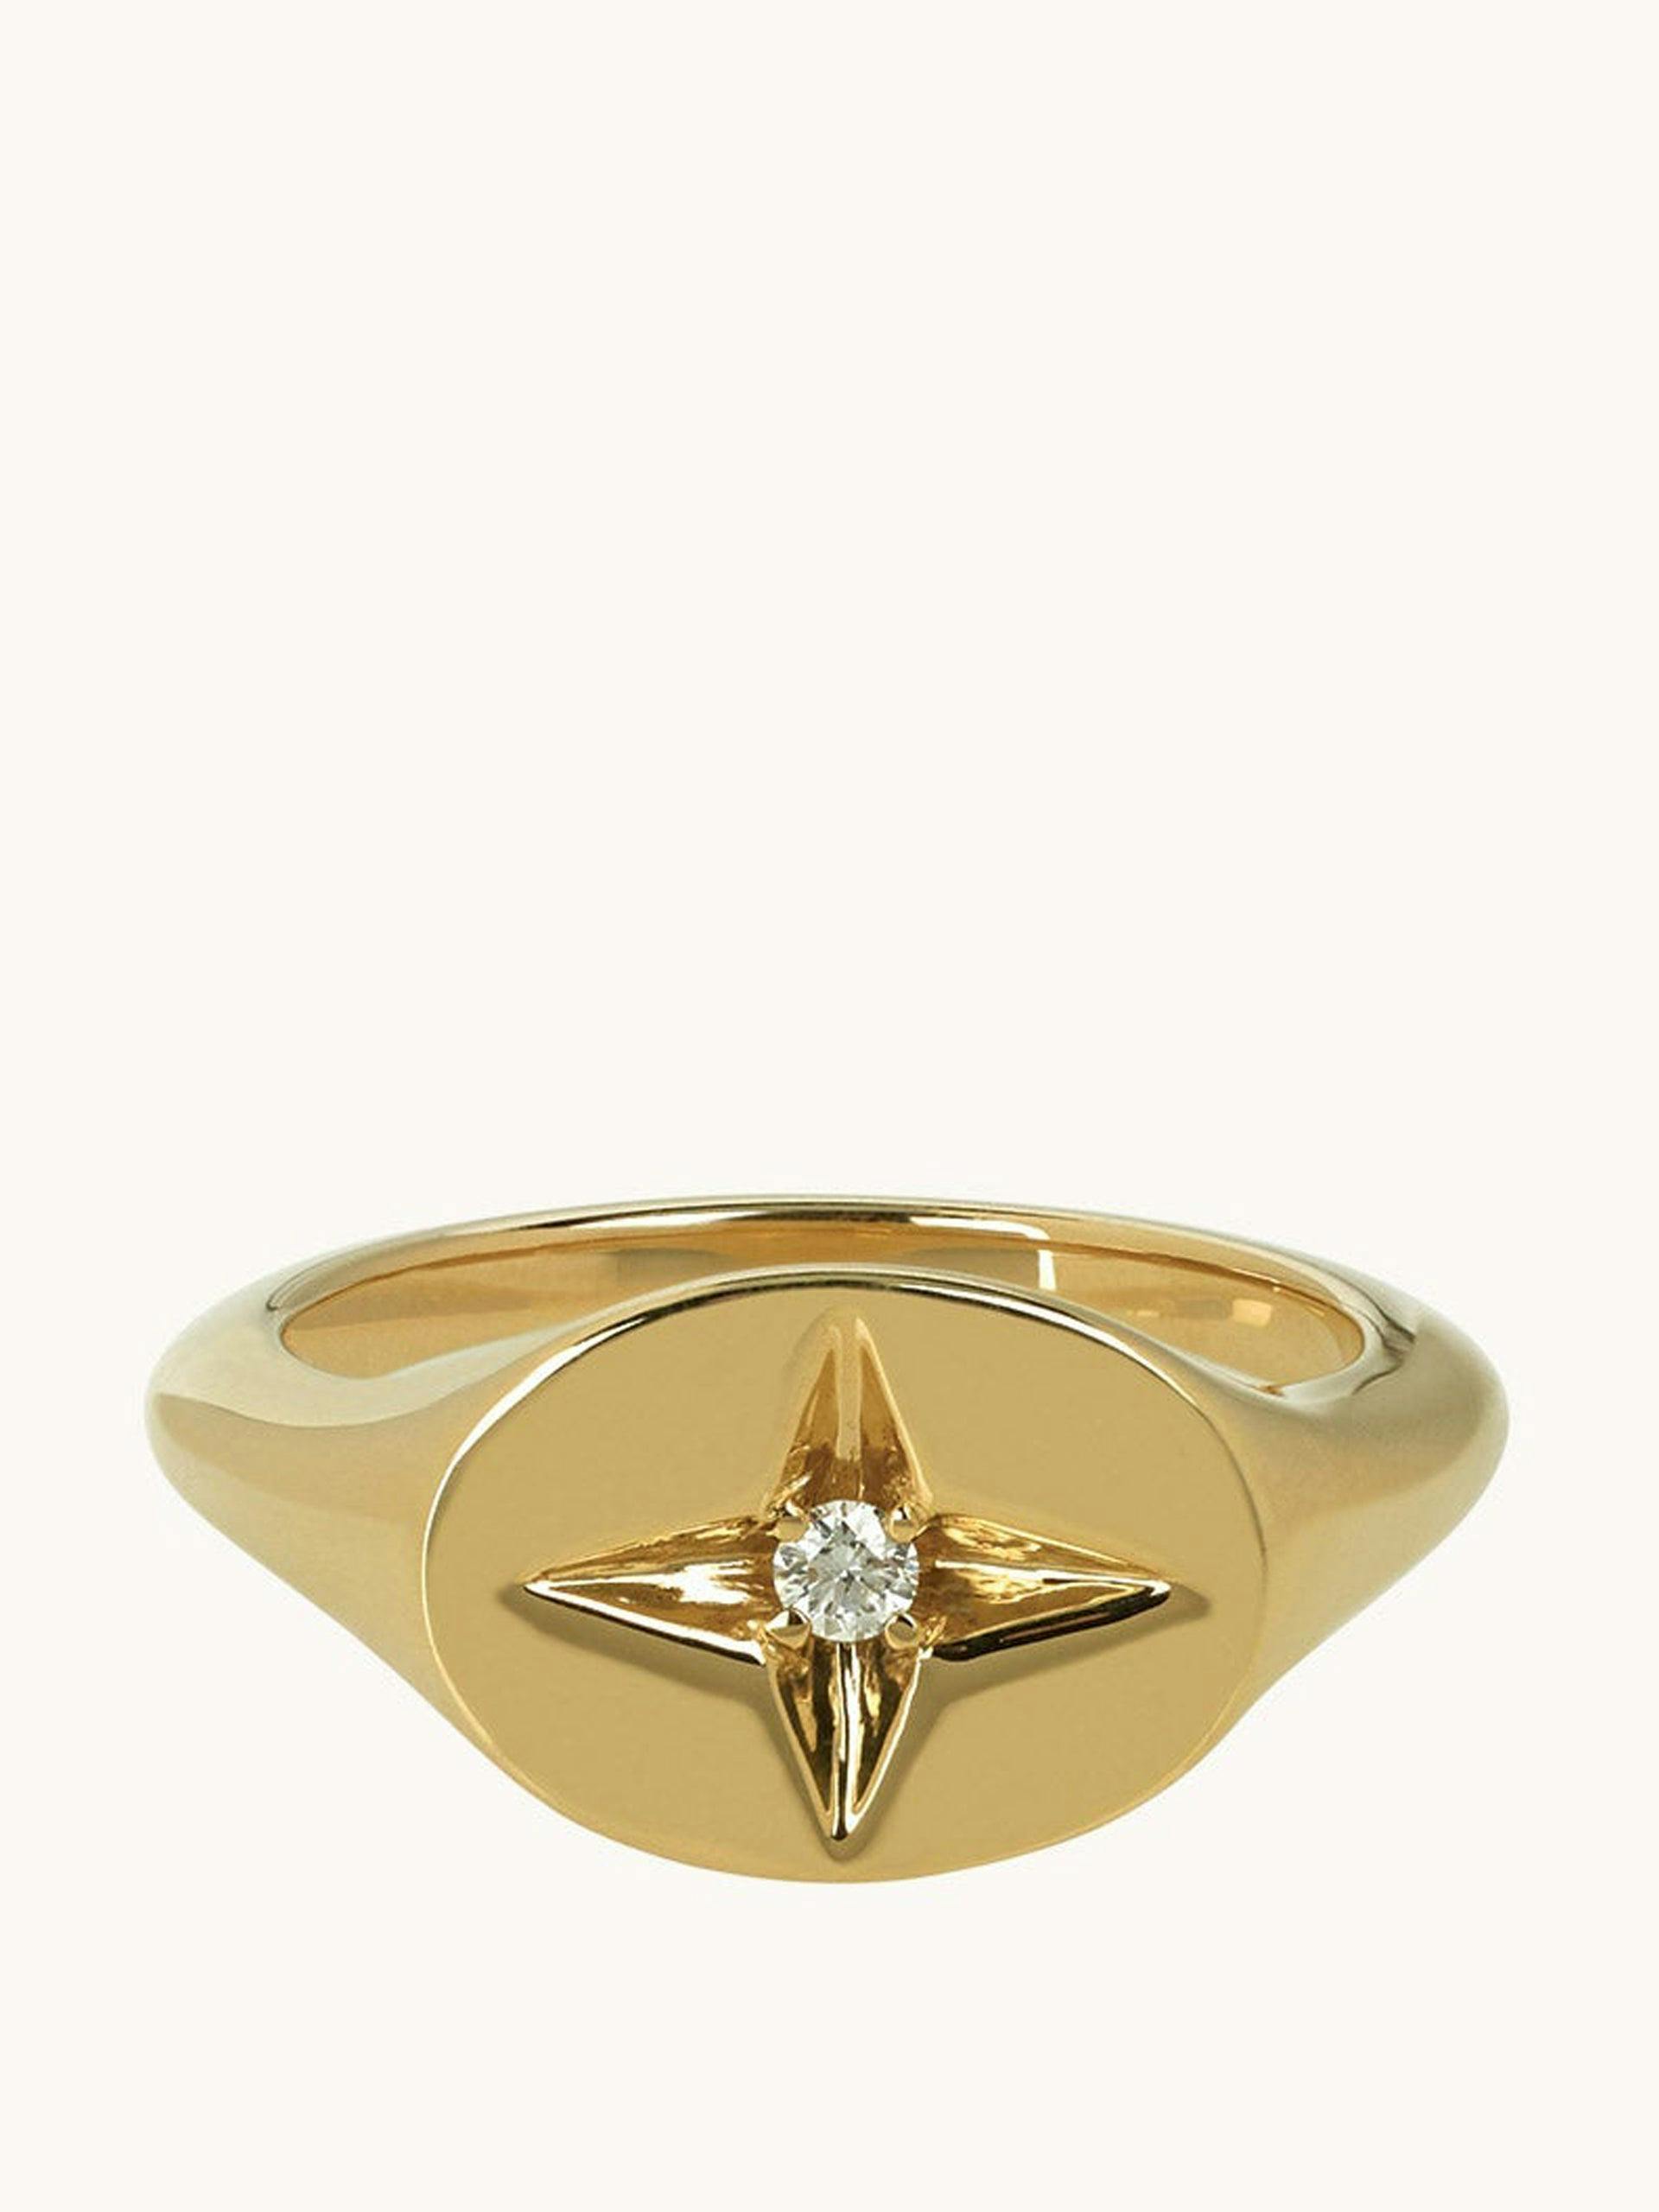 Guiding star pinky ring